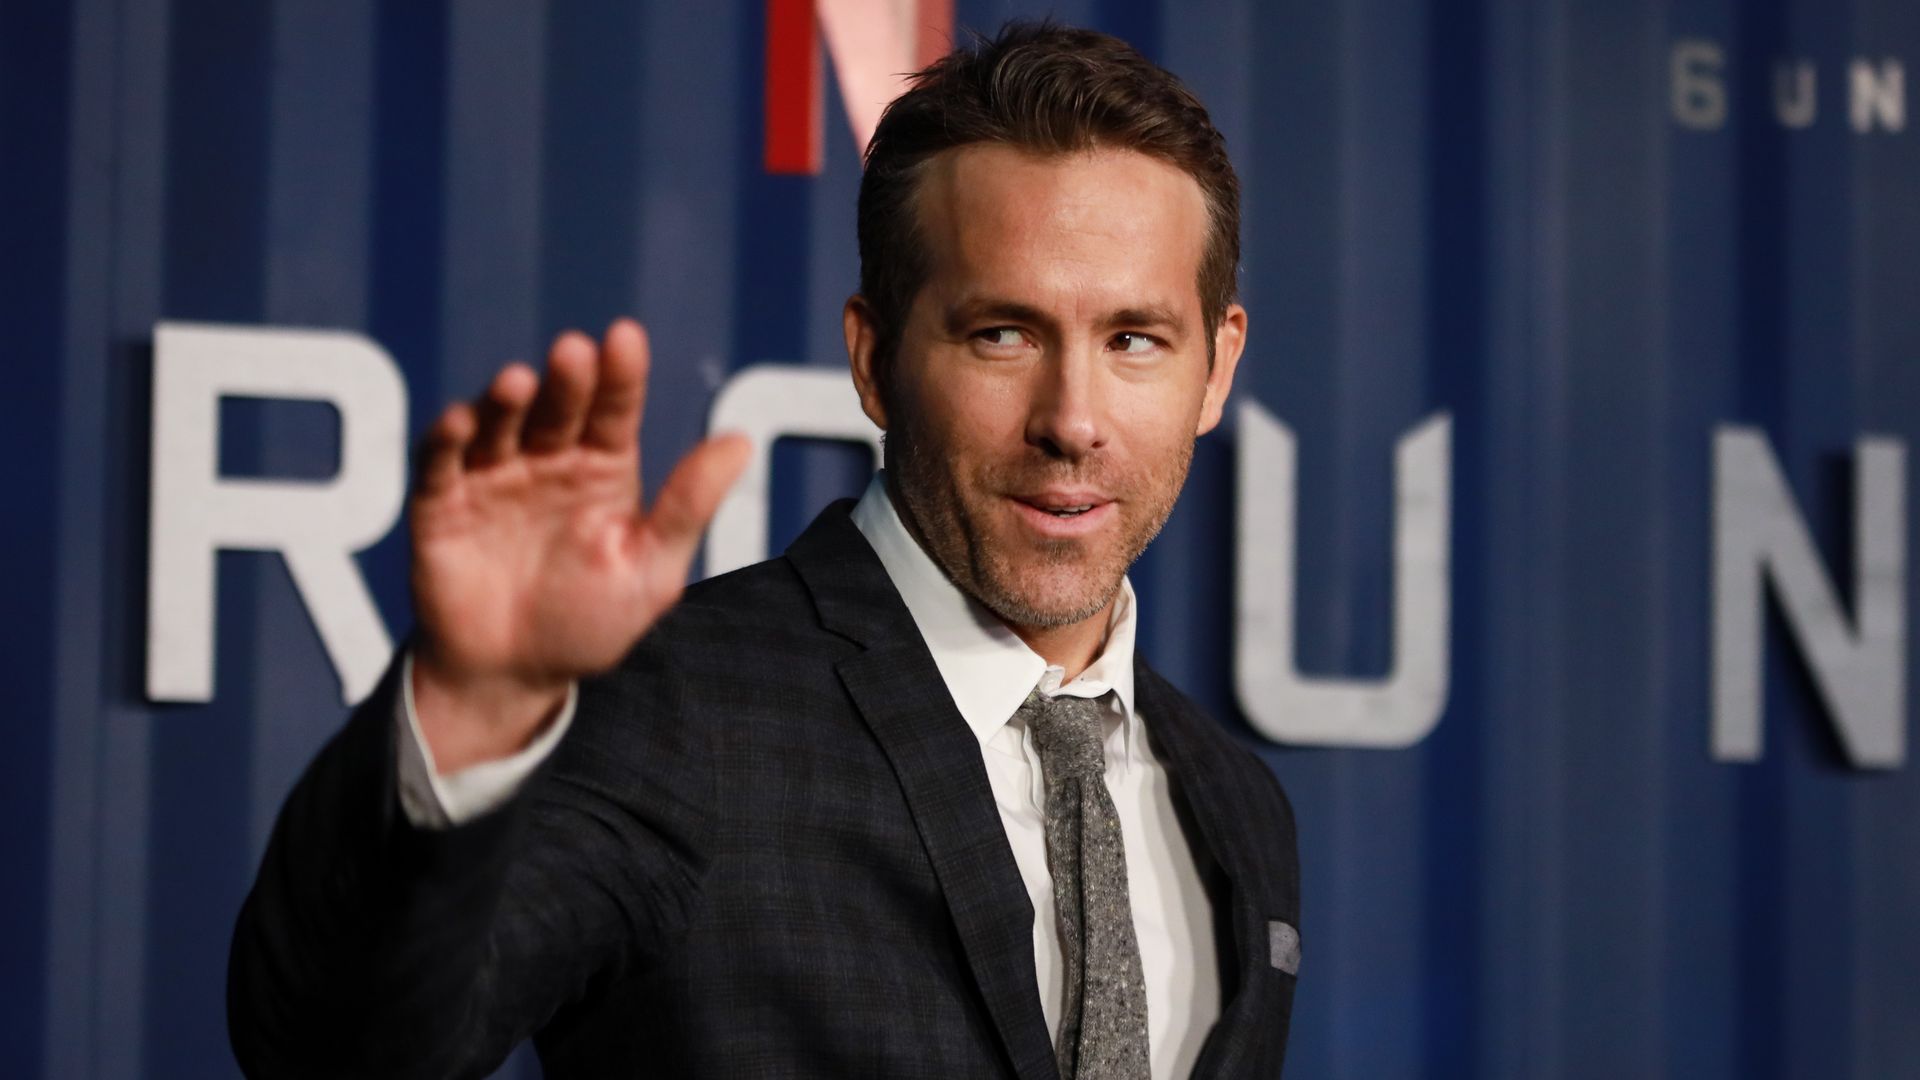 Ryan Reynolds waving at a red carpet event.